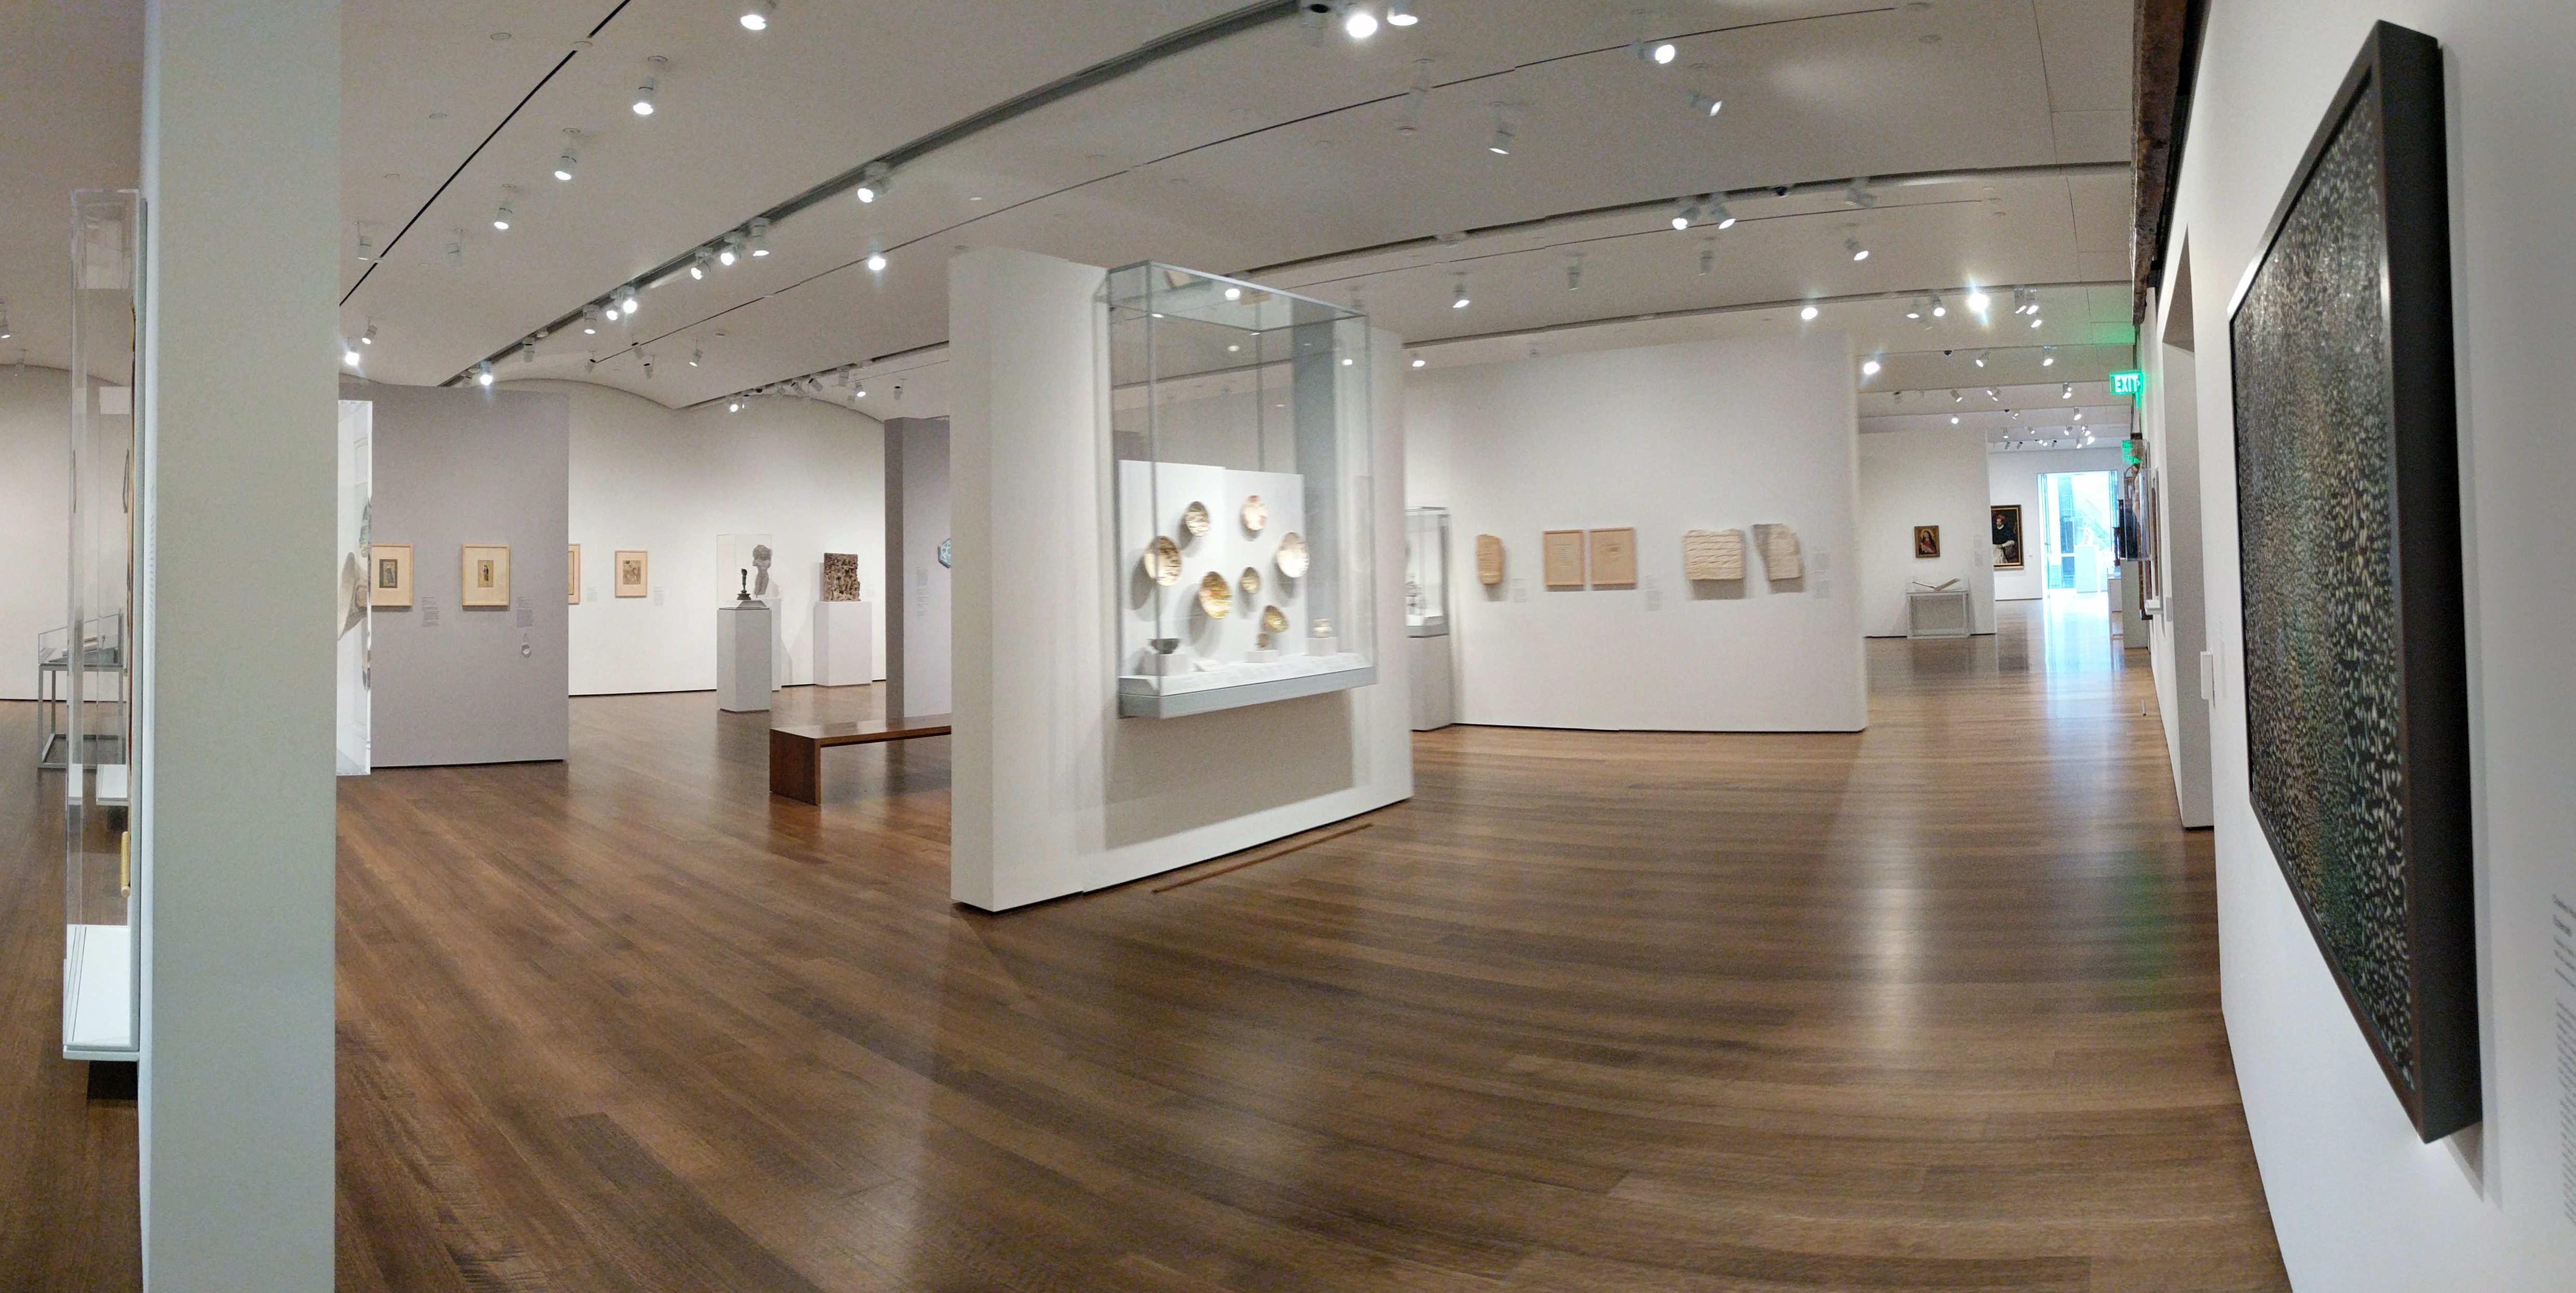 An image of an exhibit in the HAM. It is stark white, and spacious.